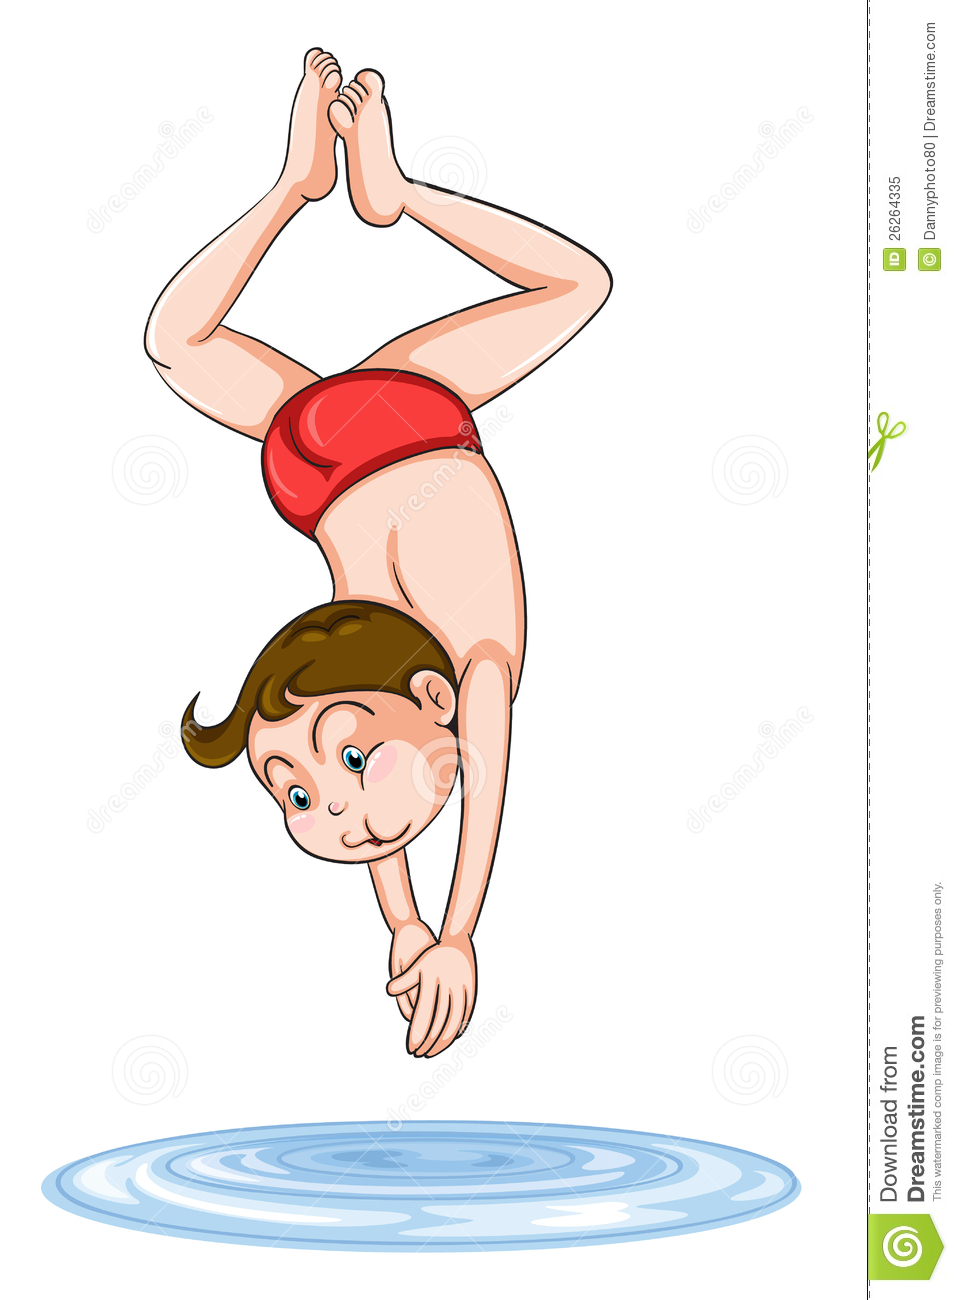 A Boy Diving Into Water Royalty Free Stock Photo.